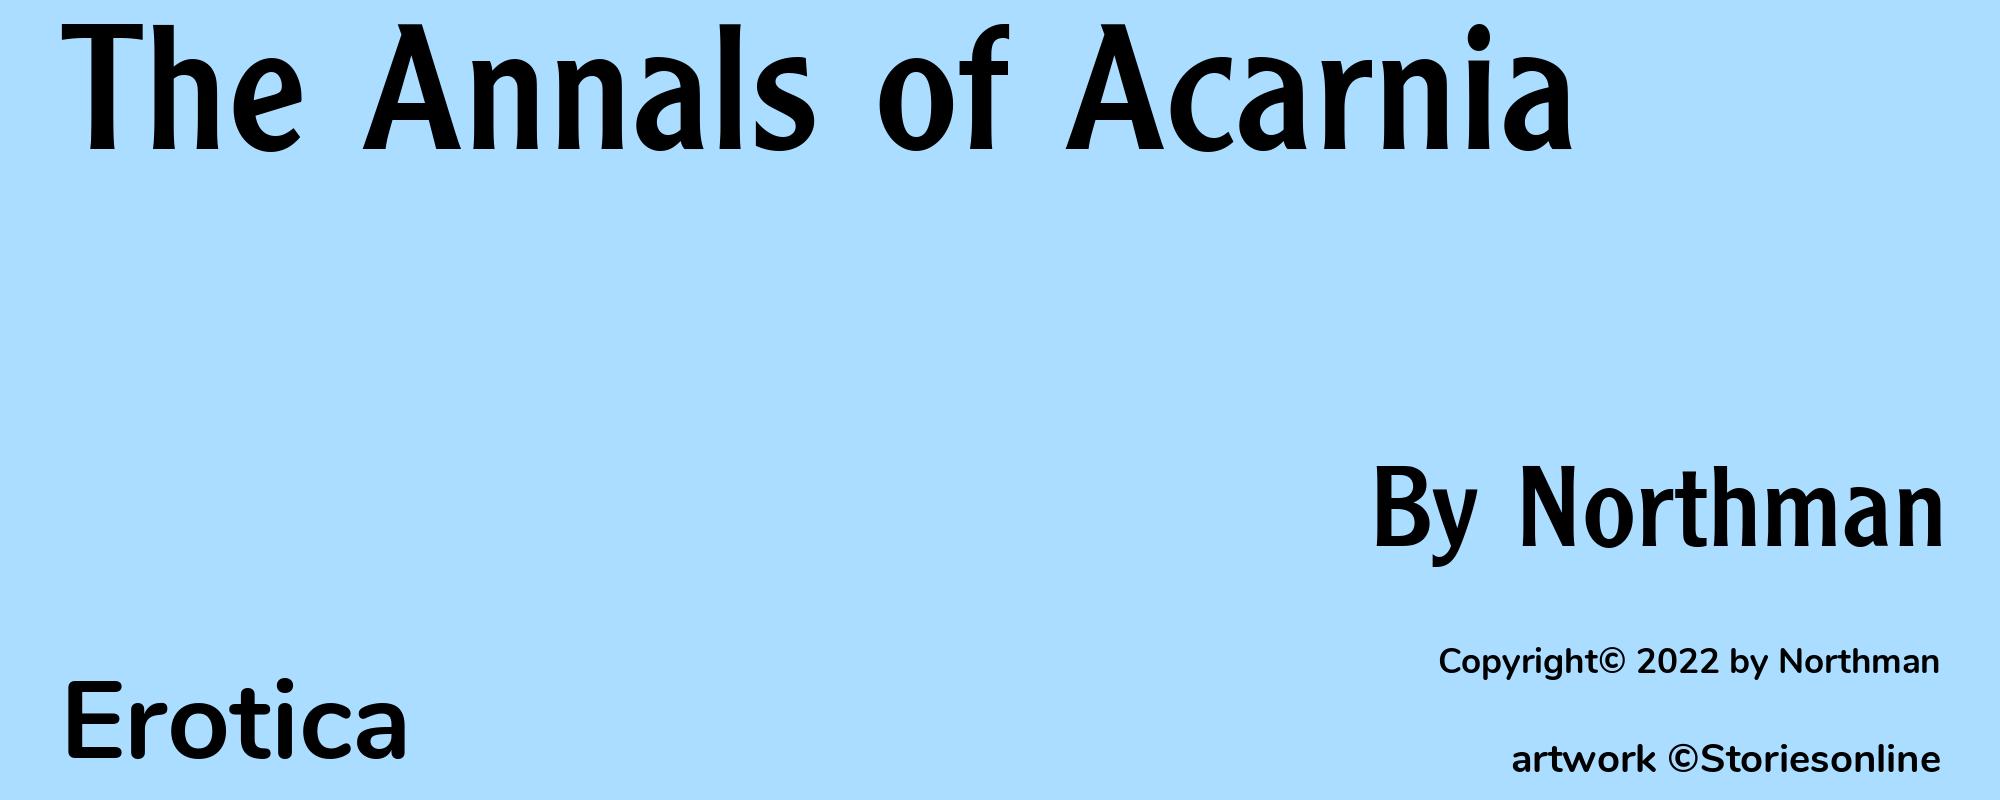 The Annals of Acarnia - Cover